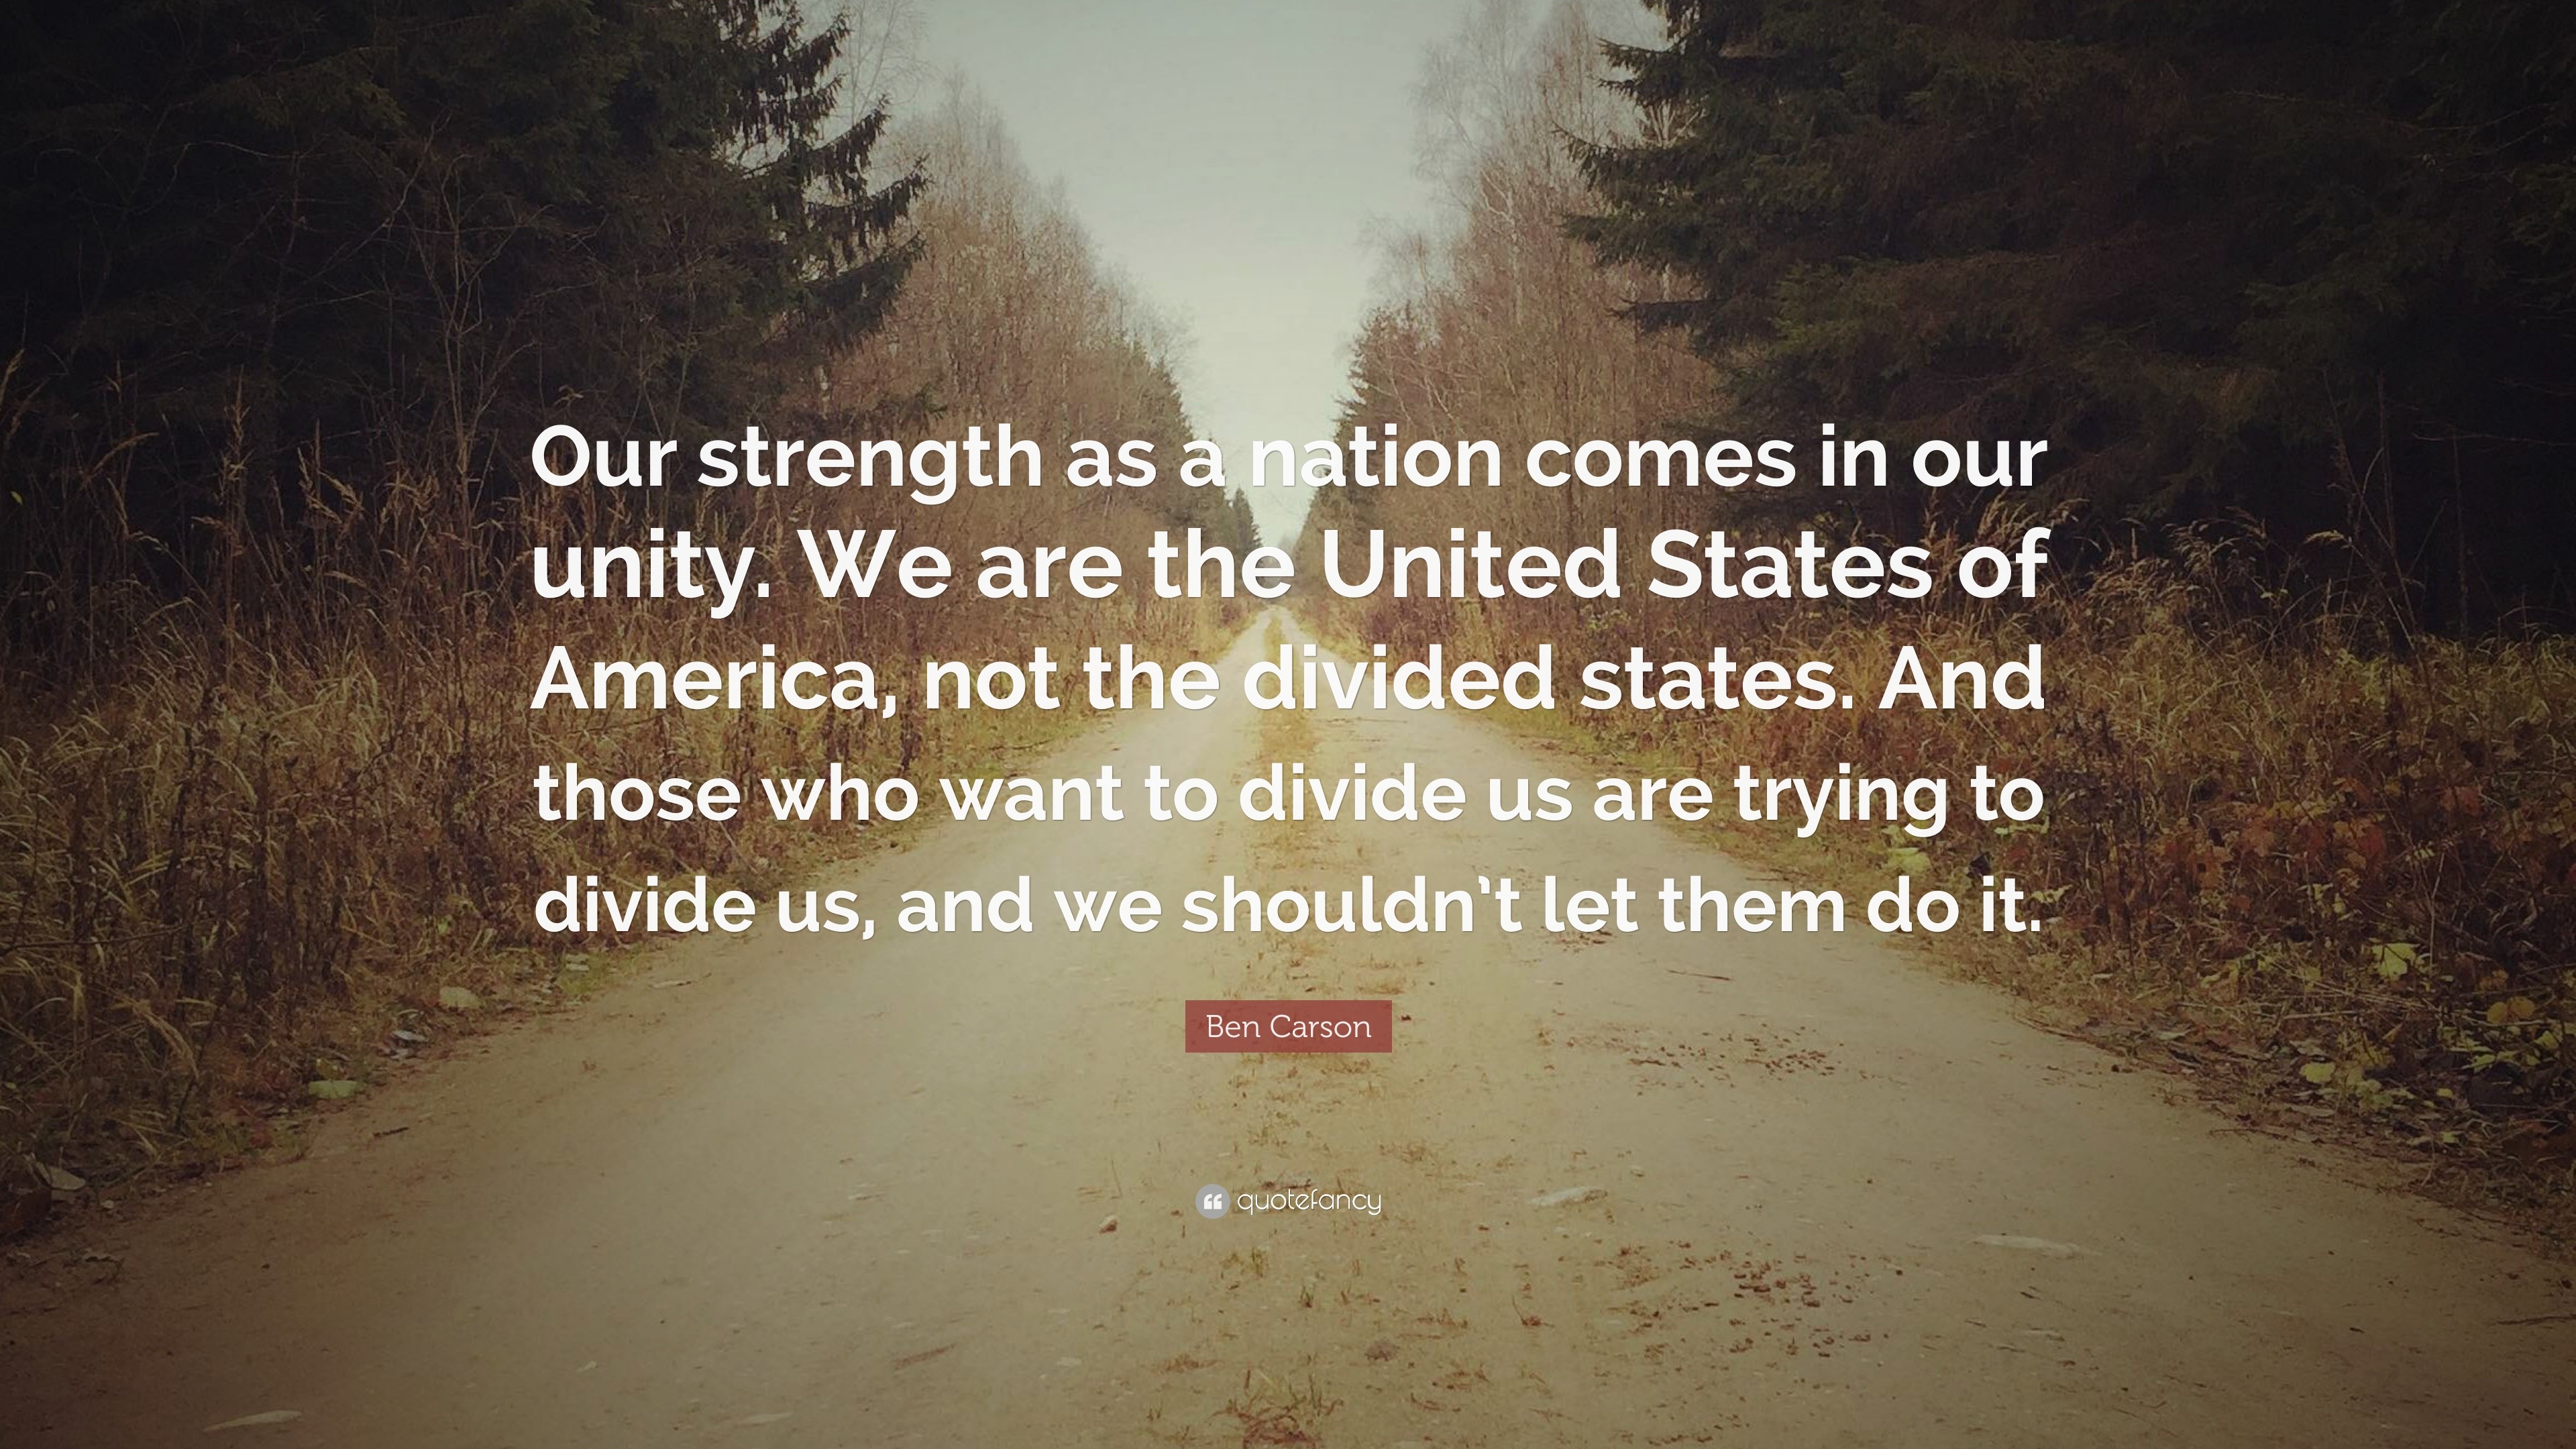 Ben Carson Quote: “Our strength as a nation comes in our unity. We are